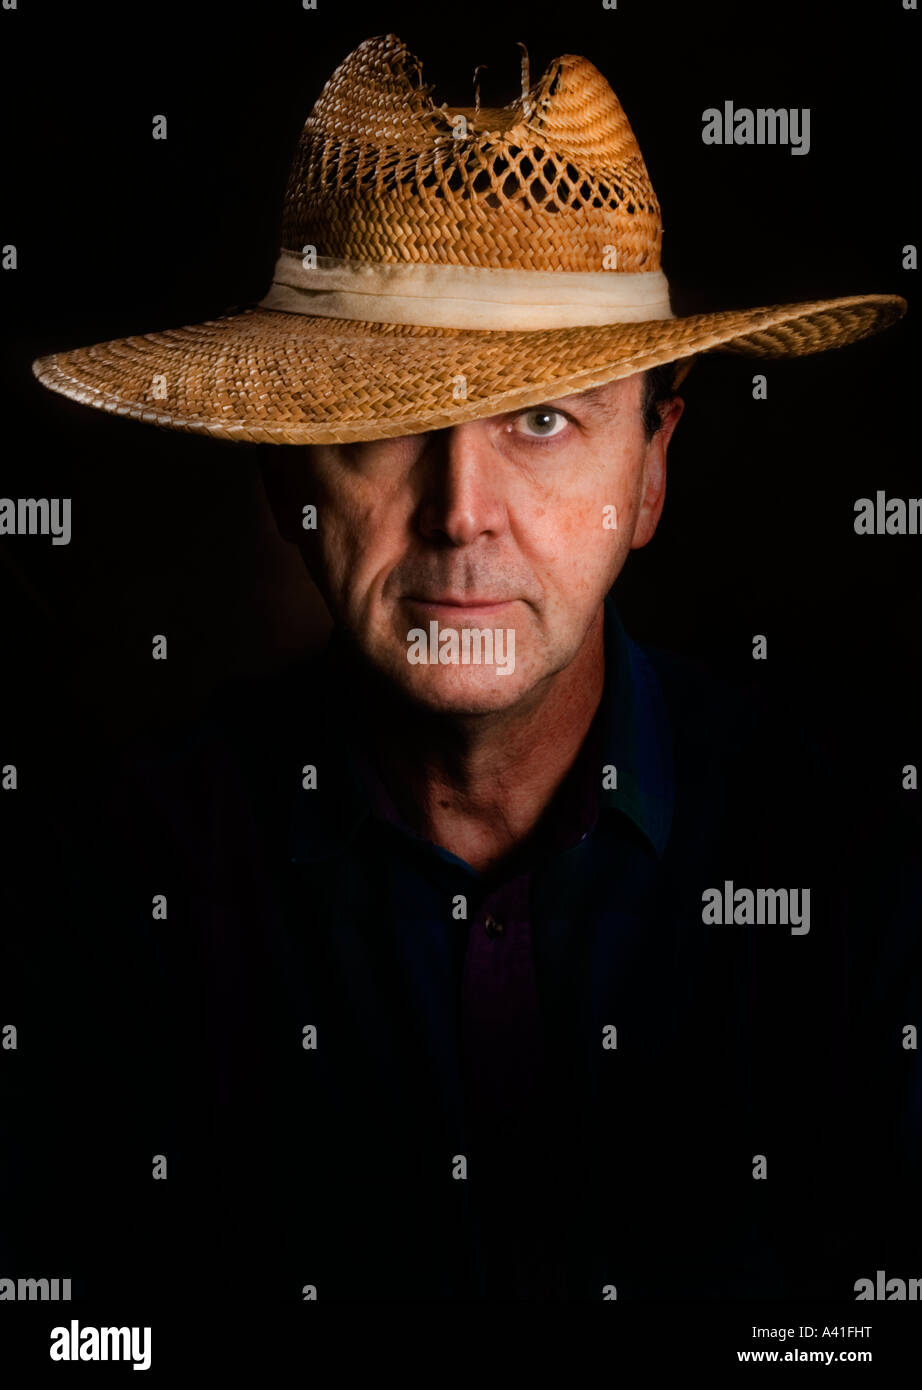 Portrait of a man in a straw fishing hat Stock Photo - Alamy